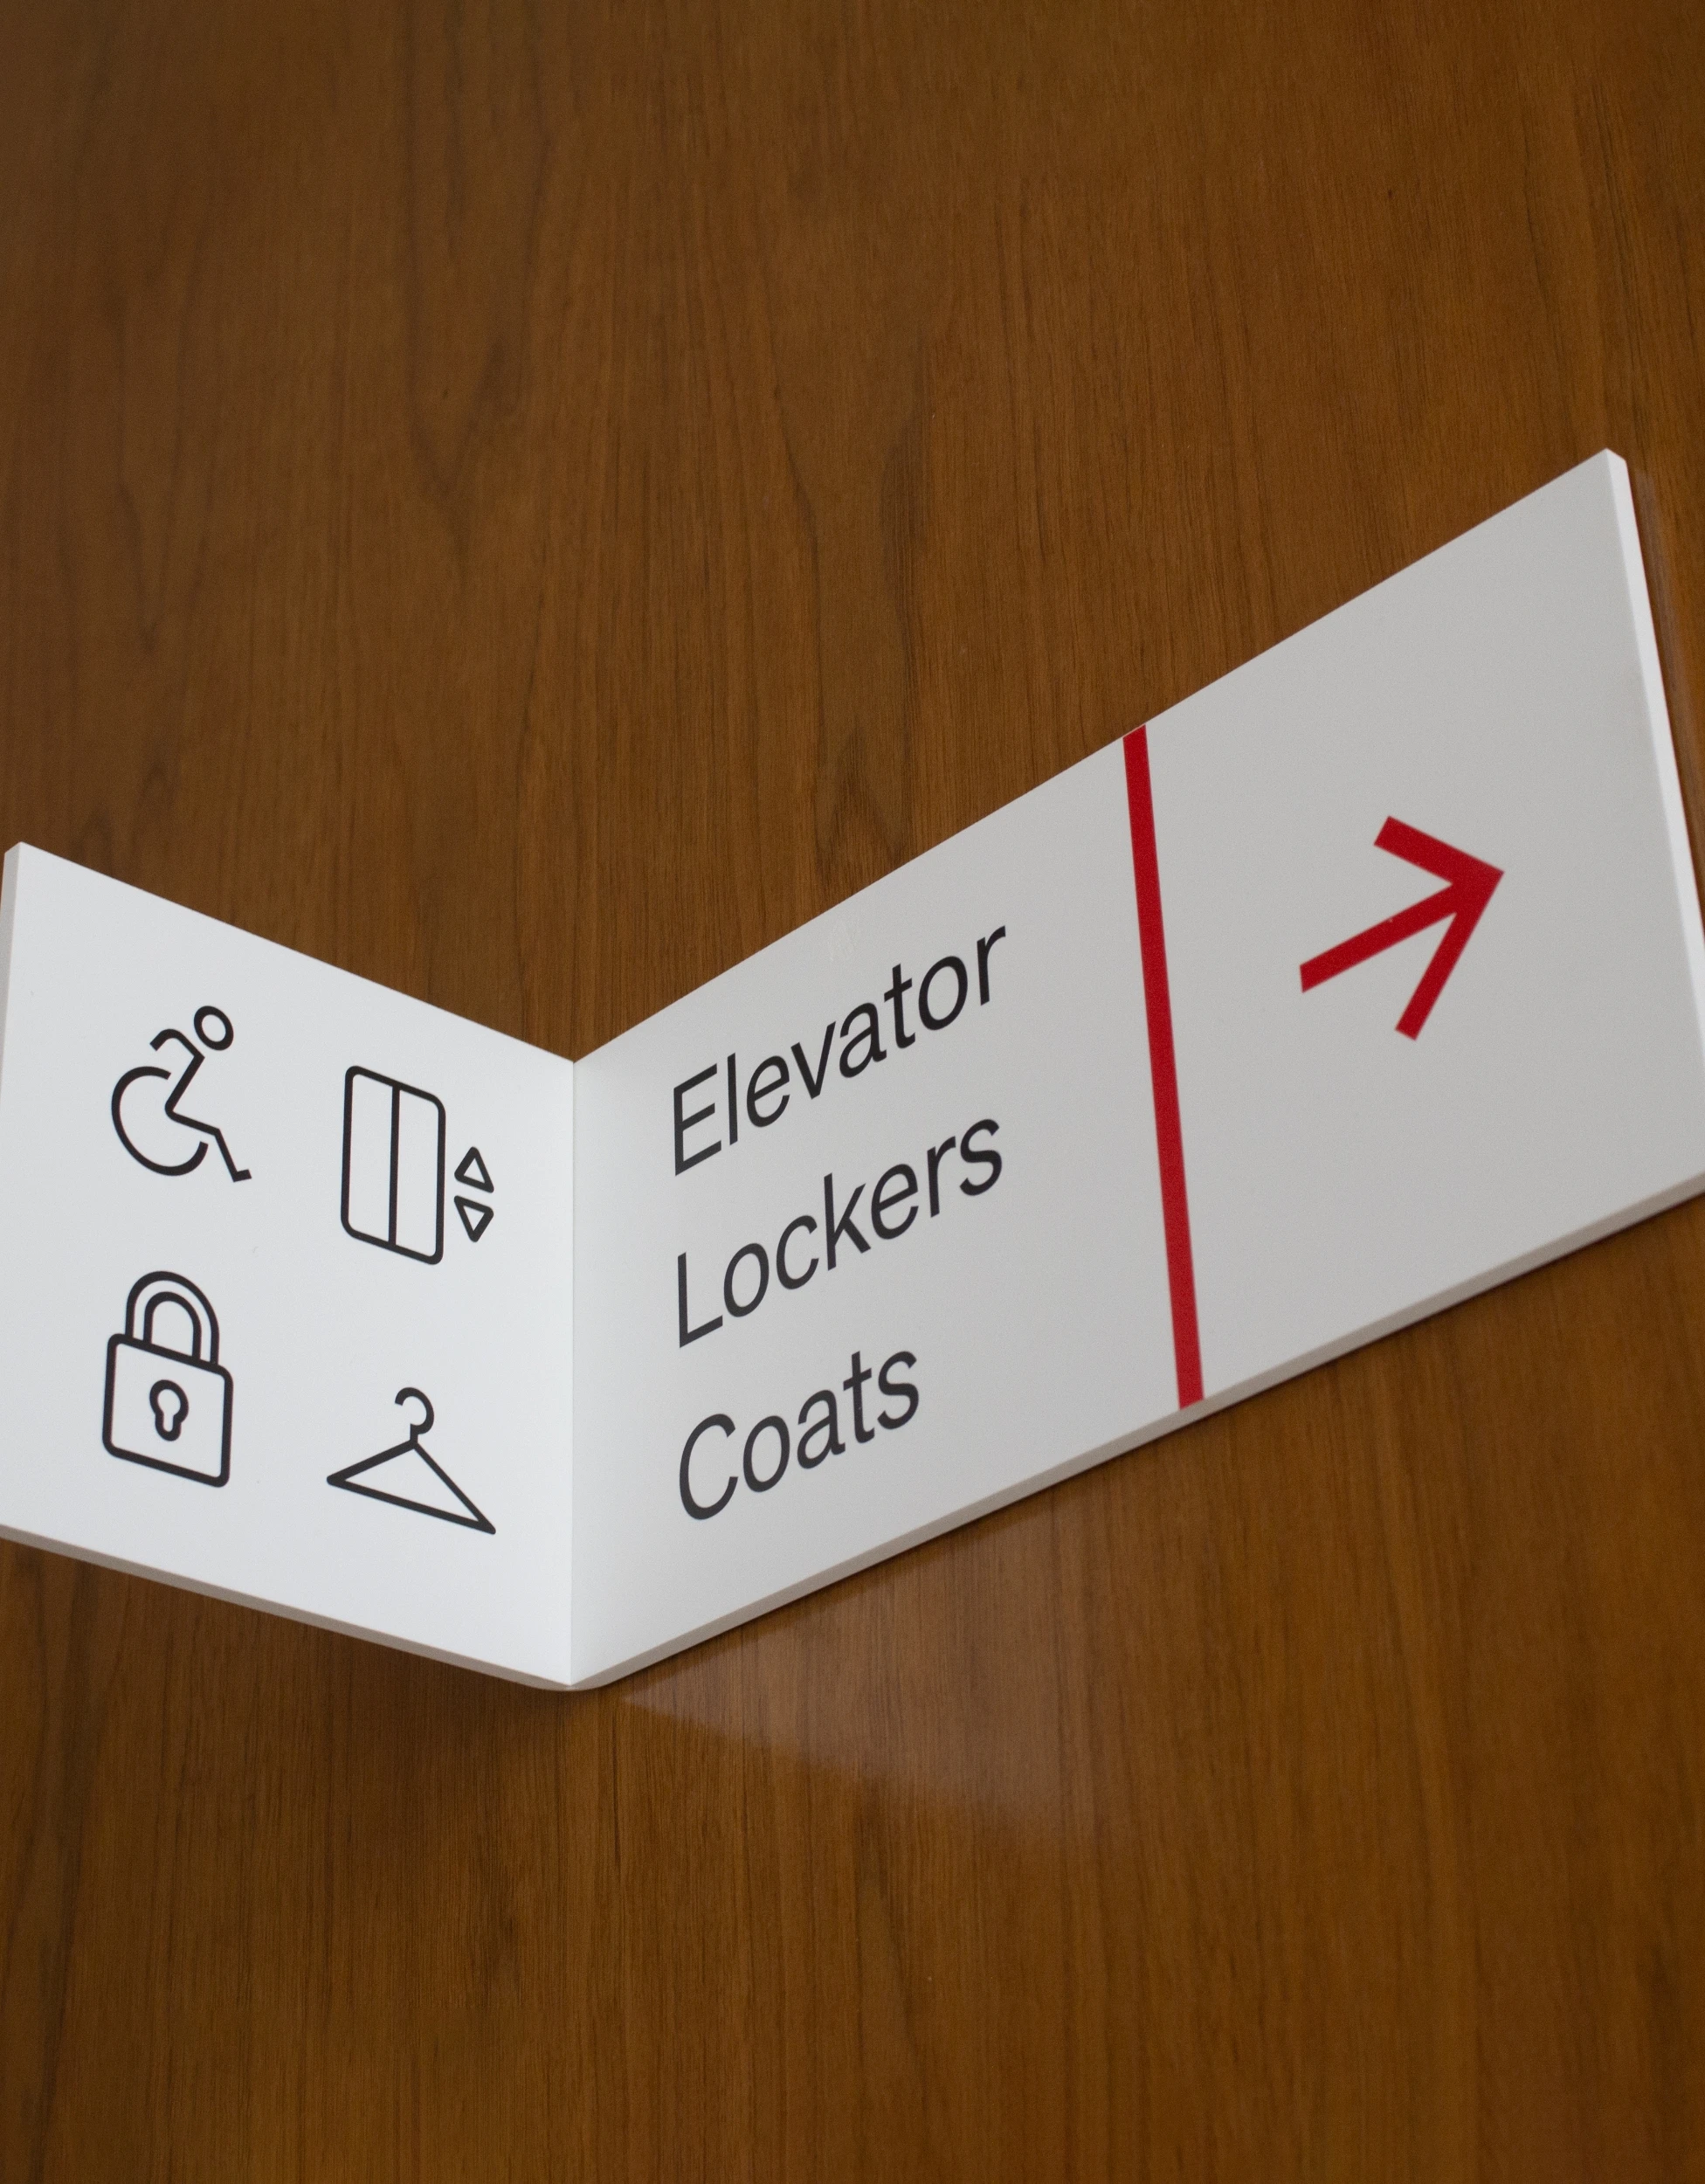 A sign that says elevator lockers coats.